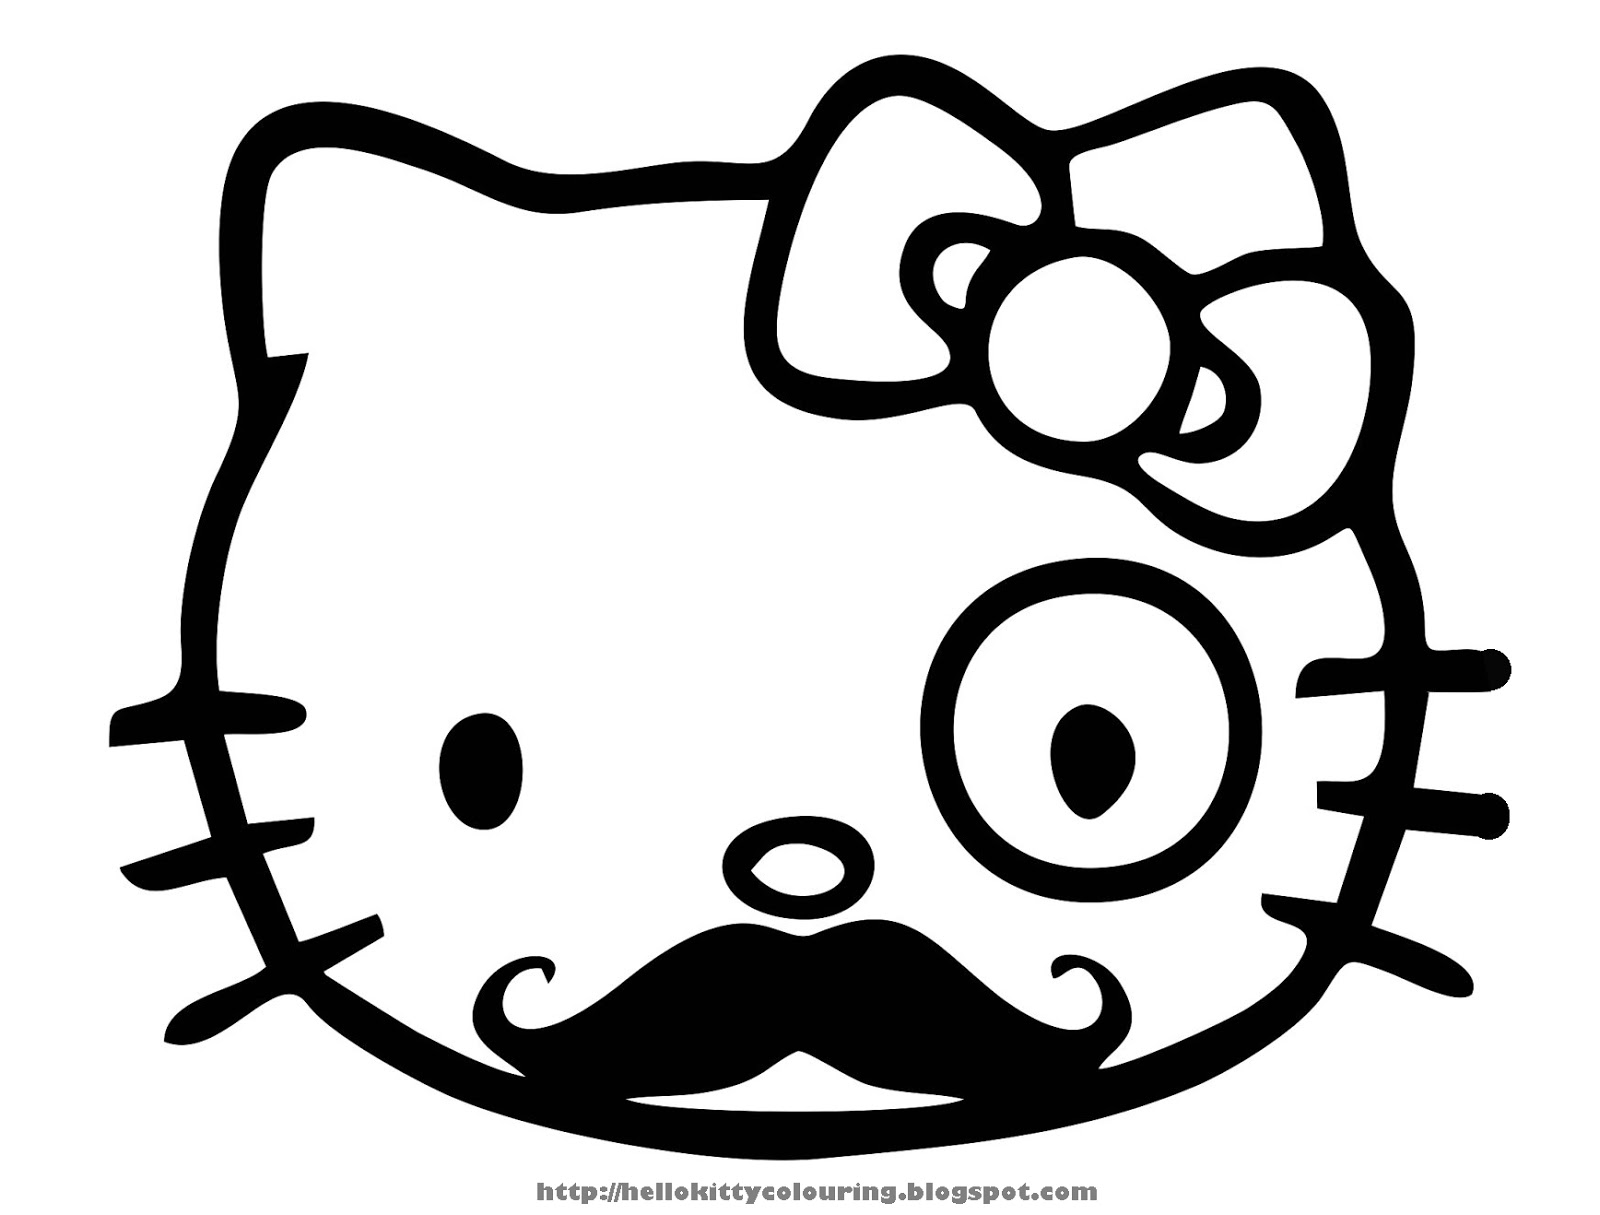 Printable Hello Kitty Coloring Pages Pdf - Printable Online